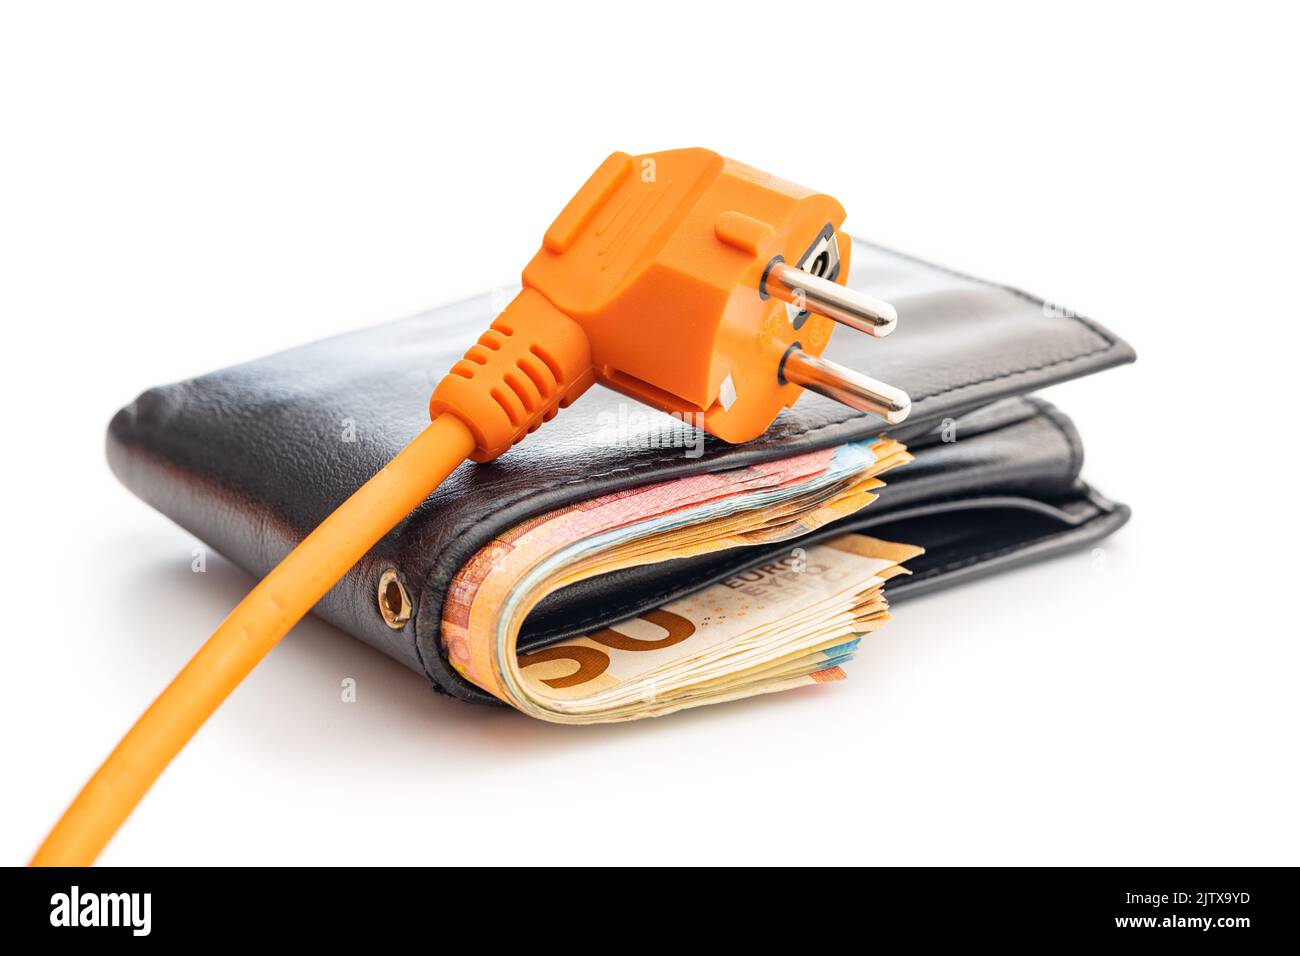 Orange electric plug and wallet with money isolated on the white background. Concept of increasing electricity prices. Stock Photo